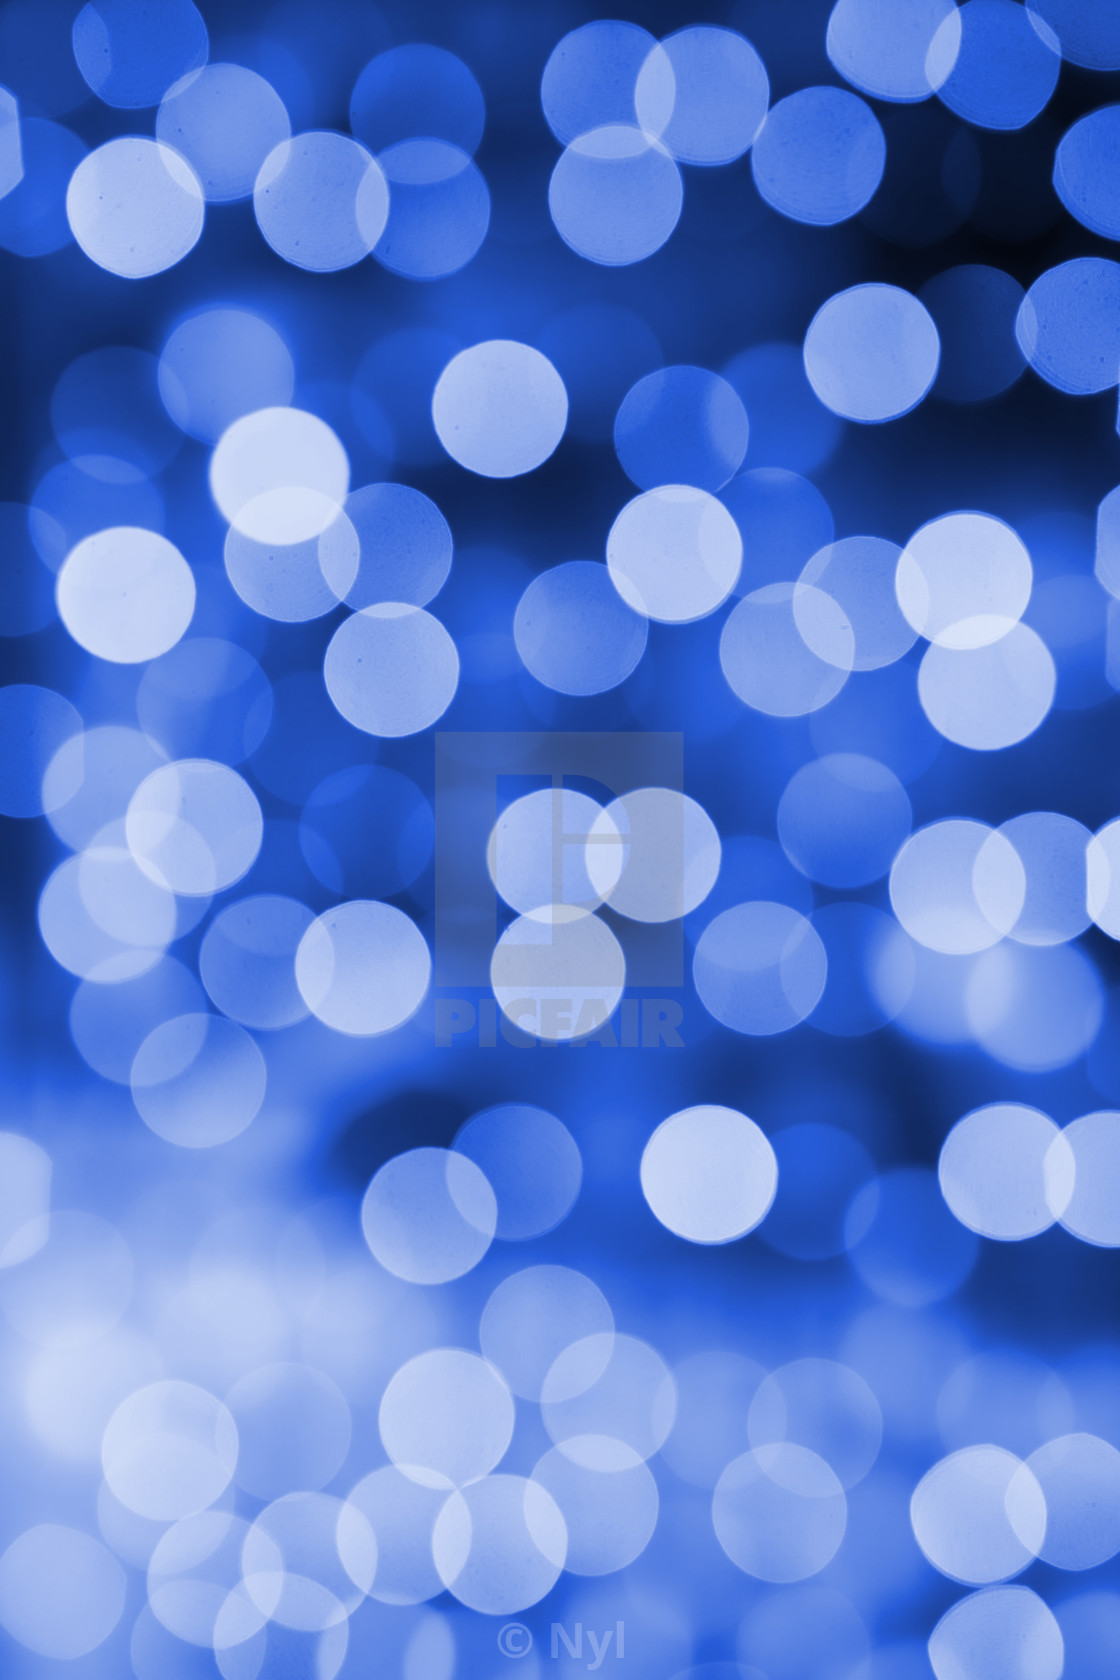 Background of blurry lights out of focus - blue - License, download or  print for £ | Photos | Picfair